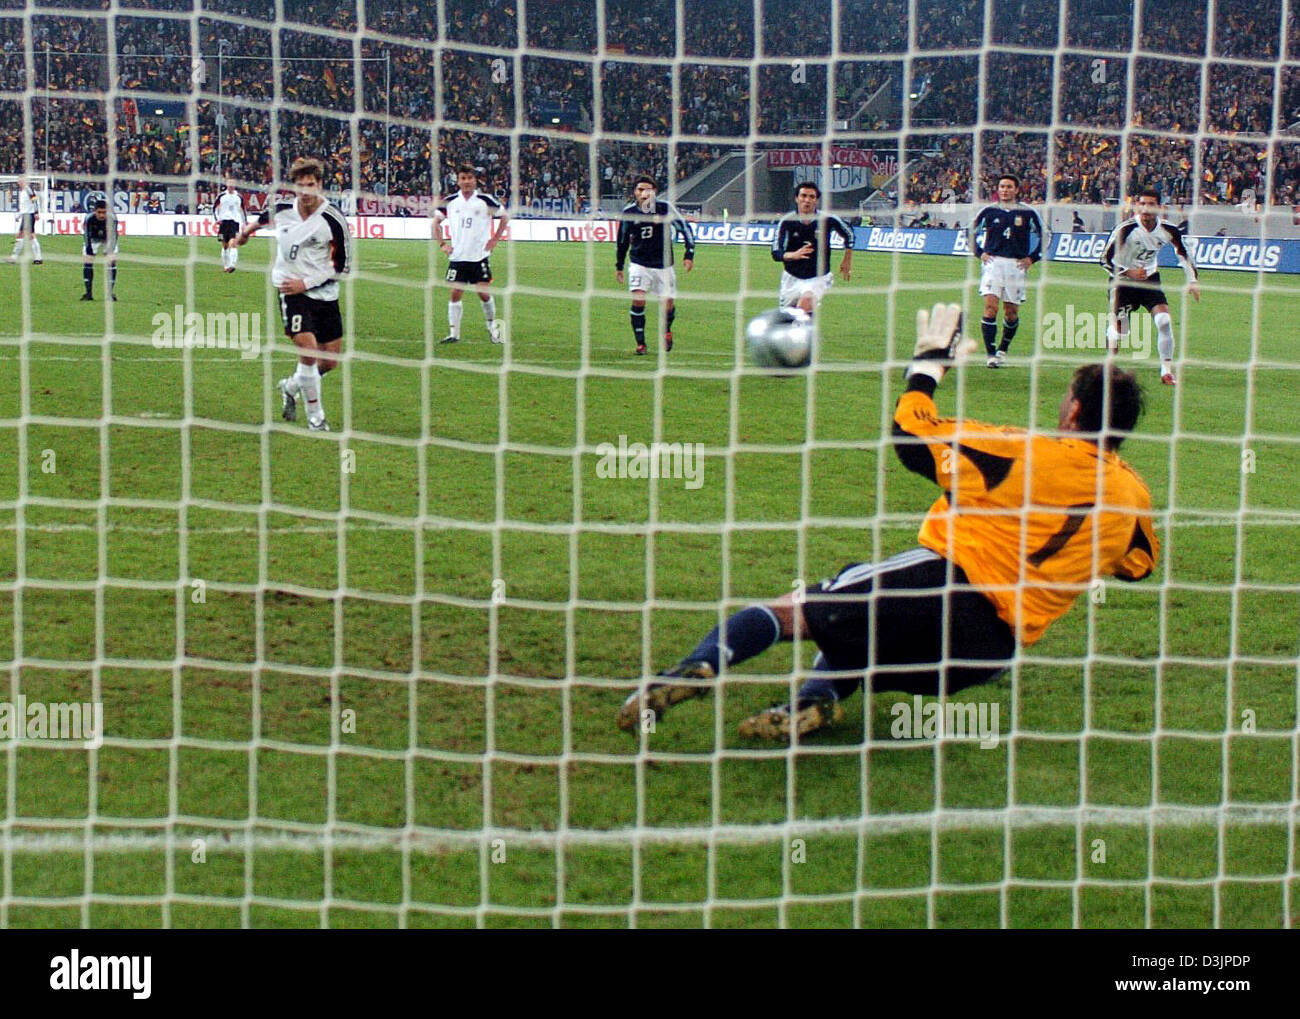 (dpa) - Argentina's goalkeeper Roberto Abbondanzieri cannot not save the penalty of German player Torsten Frings, who scores the 1-0 lead goal during the international friendly between Germany and Argentina at the LTU arean in Duesseldorf, Germany, 09 February 2005. Stock Photo